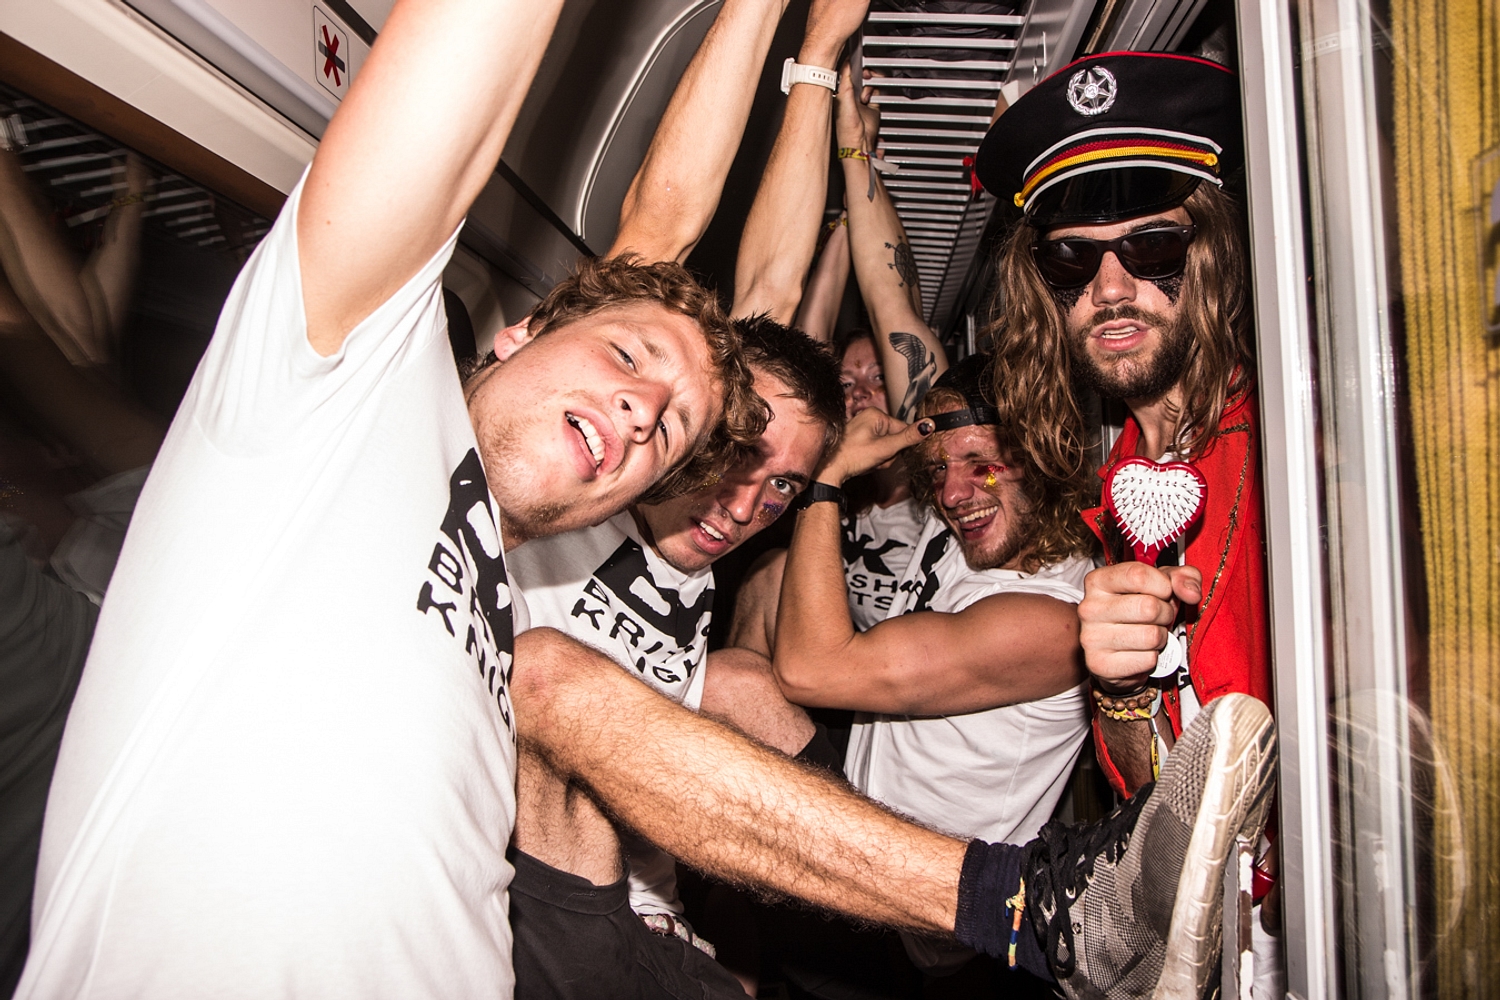 Climb aboard the British Knights Express party train to Sziget Festival